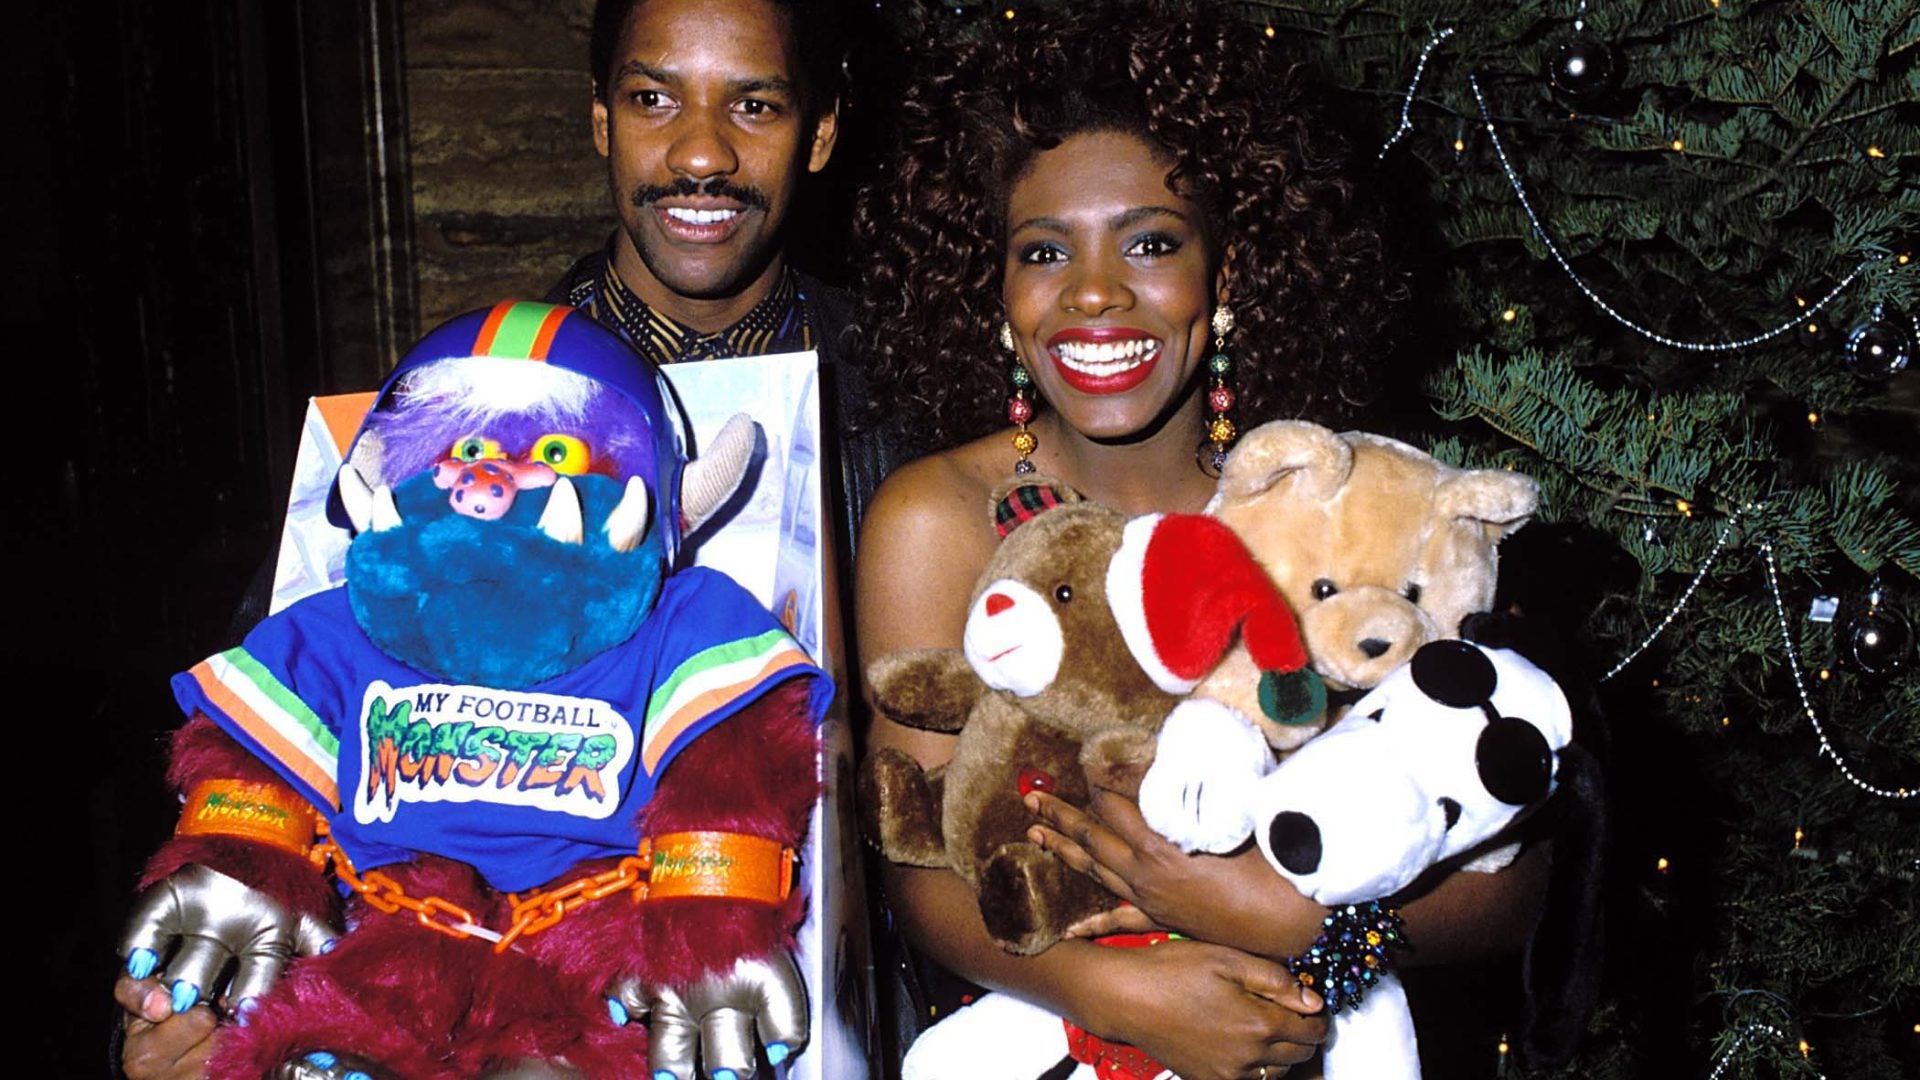 19 Moments Of Vintage Black Joy You Didn't Know You Didn't Know You Needed To See